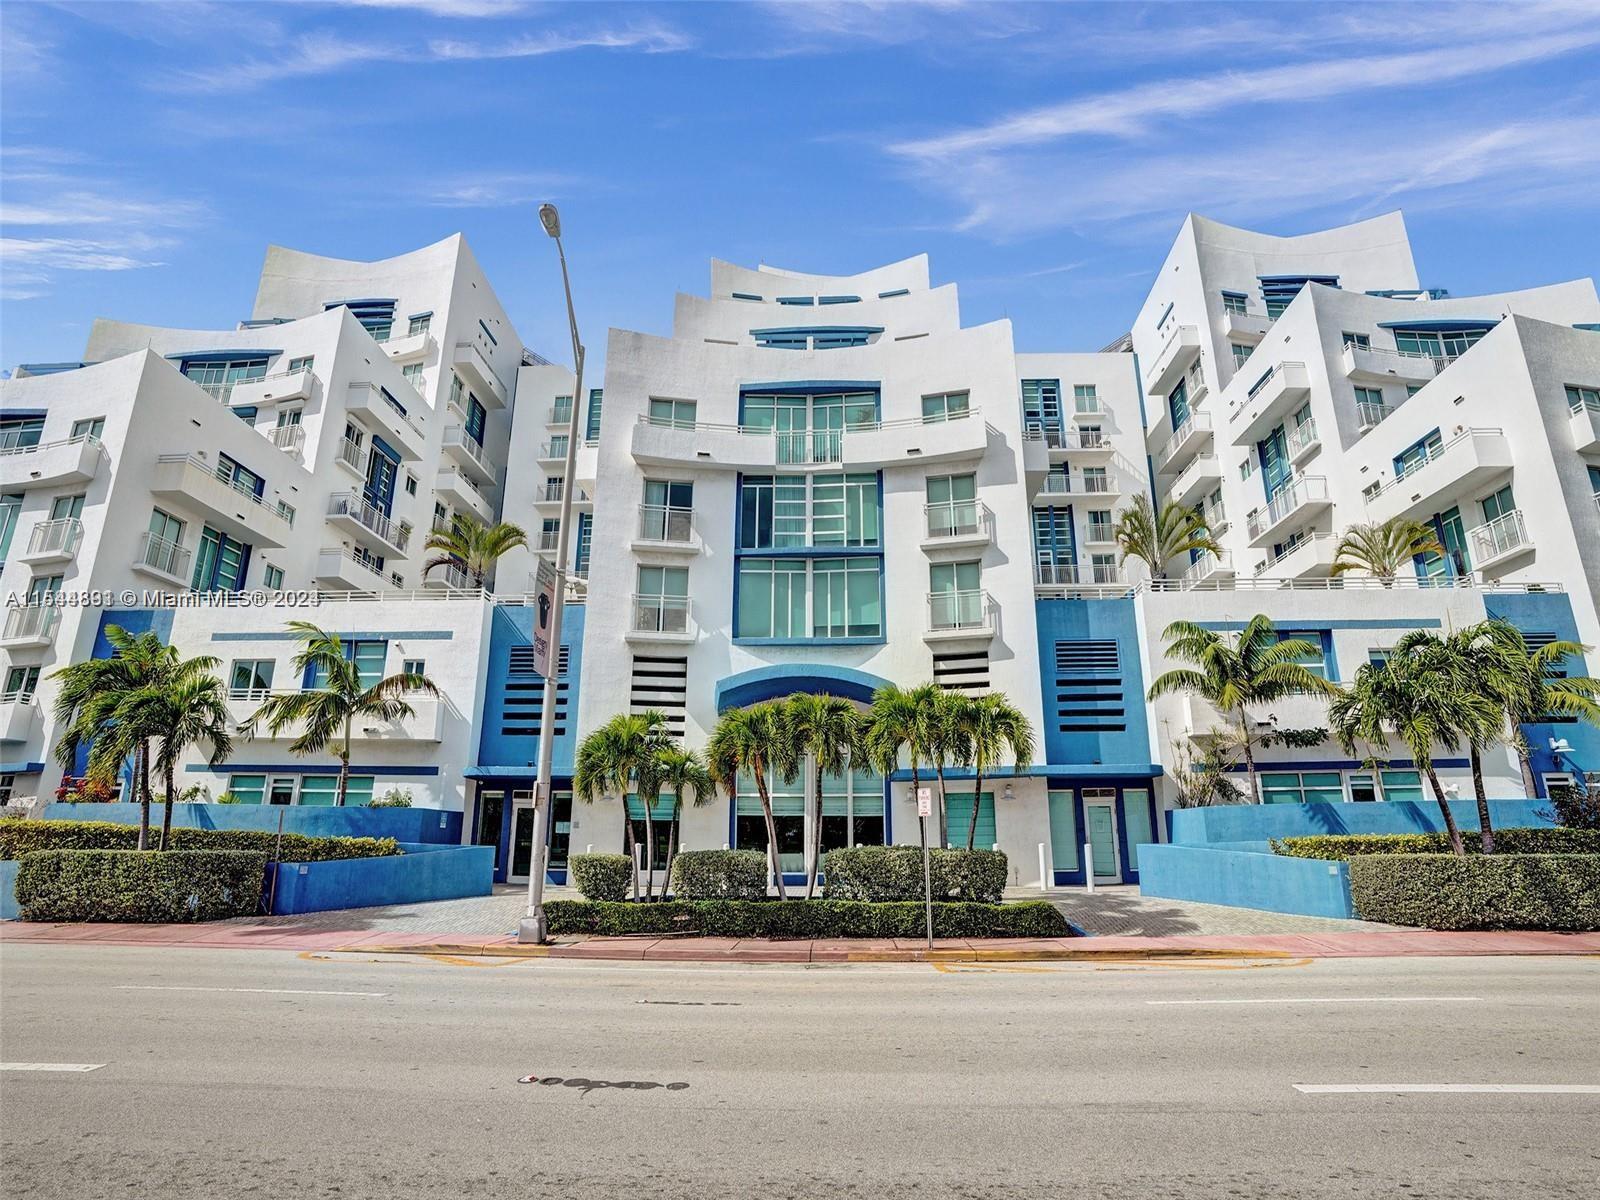 Two stories unit. 2/2 and half bathroom. Great building across the street from the beach ,boardwalk and park. Amenities feature ,heated pool, jacuzzi ,sauna, gym. 24h concierge & security, Easy to show call listing brokers